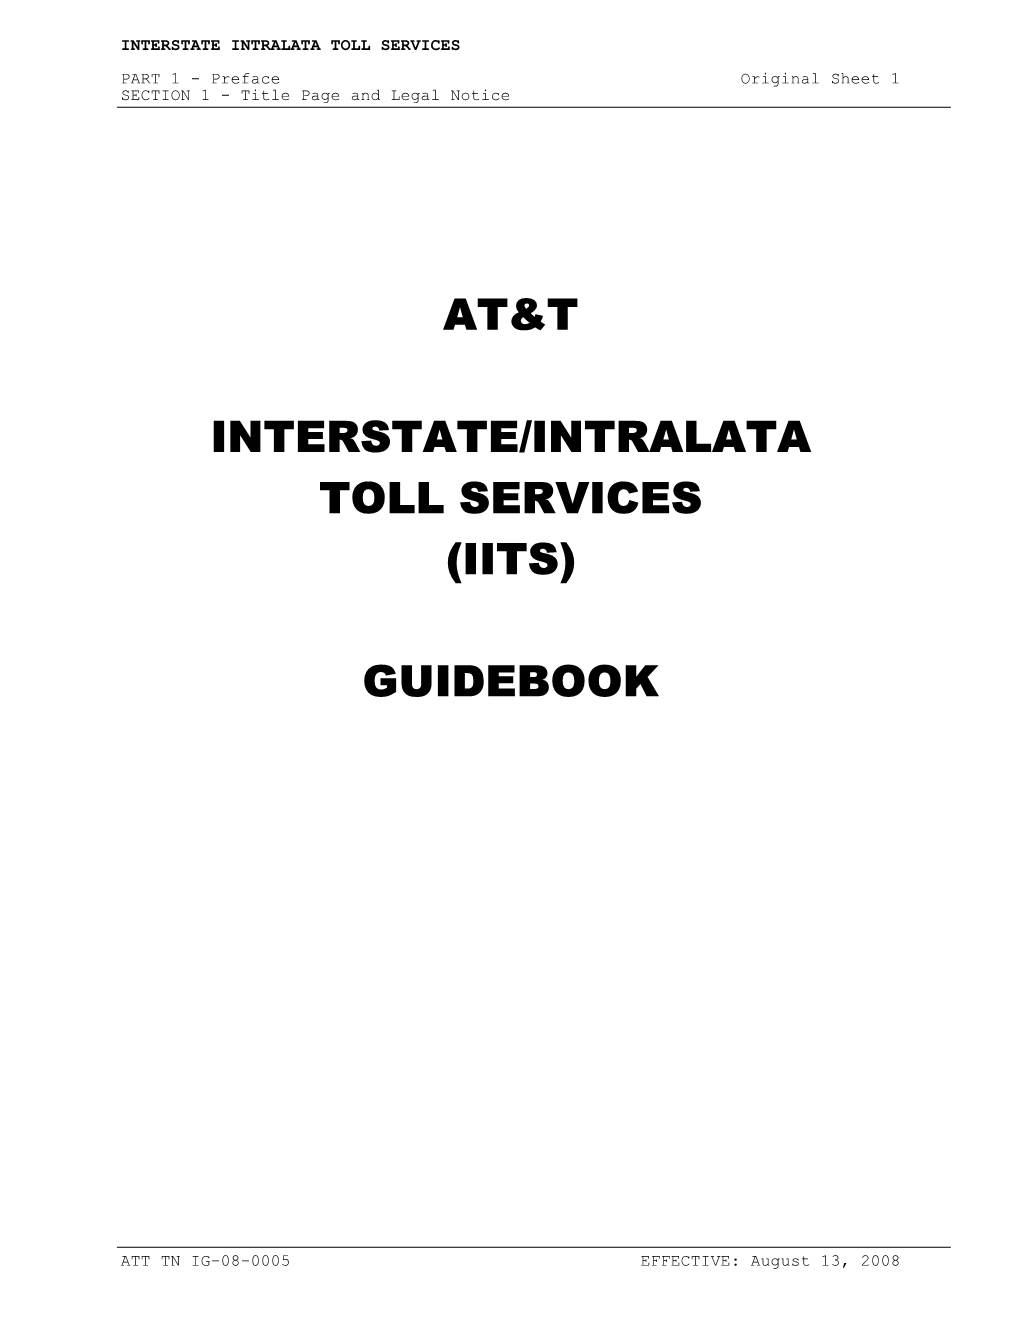 At&T Interstate/Intralata Toll Services (Iits) Guidebook